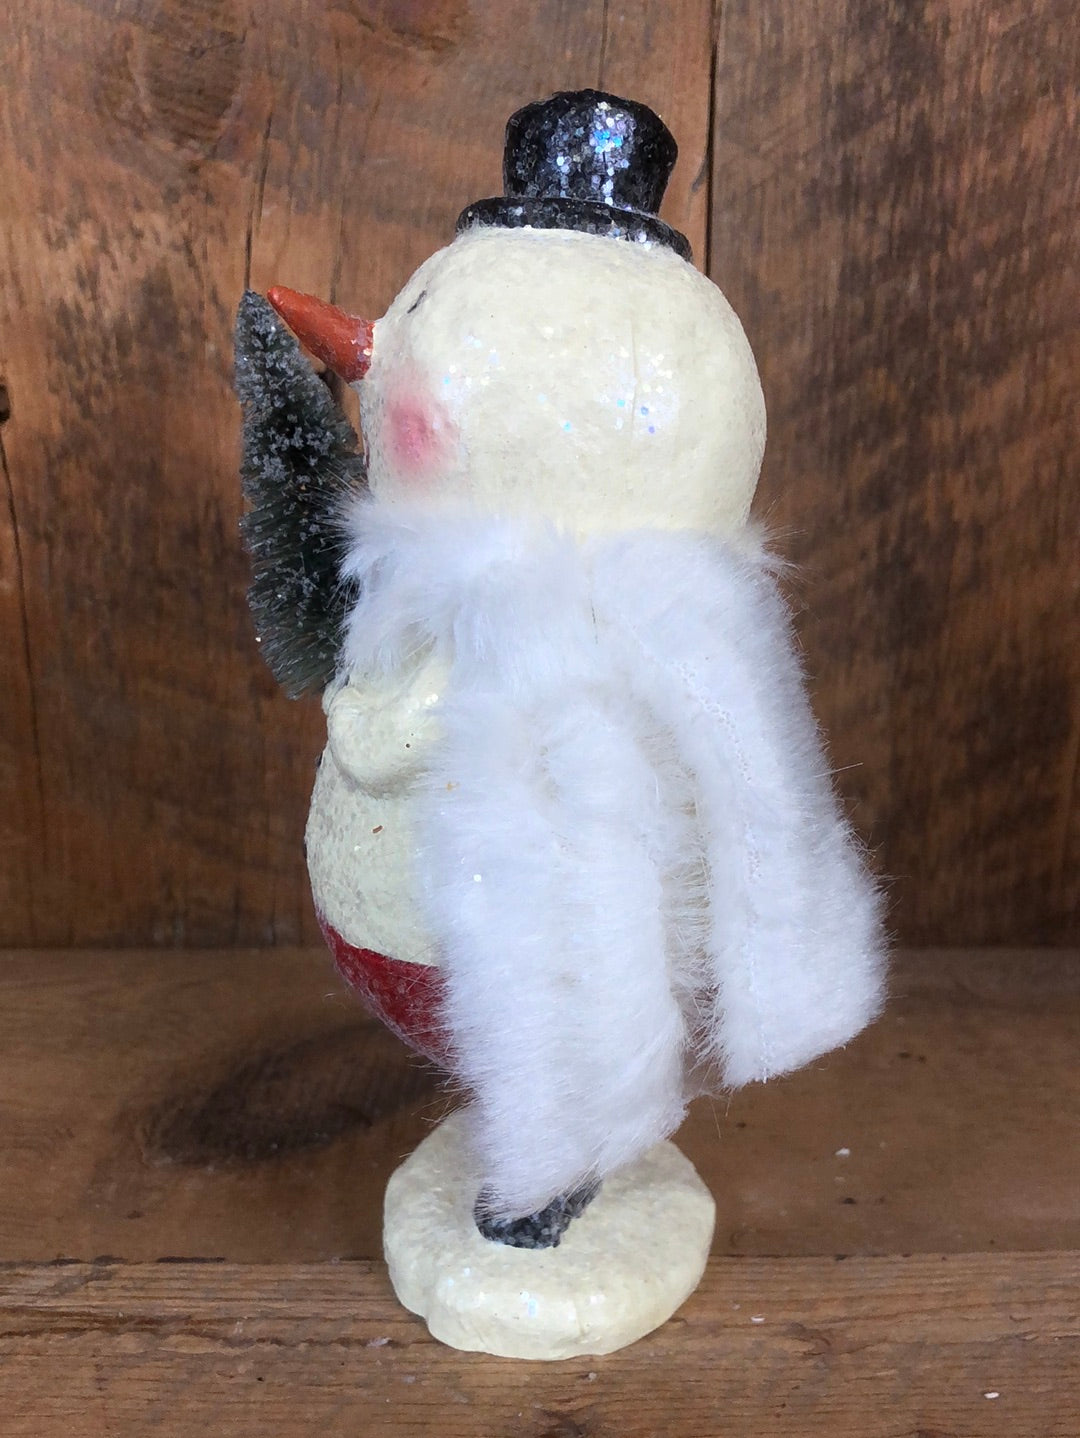 Sparkle Paper Pulp Snowman with Forest Green Tree